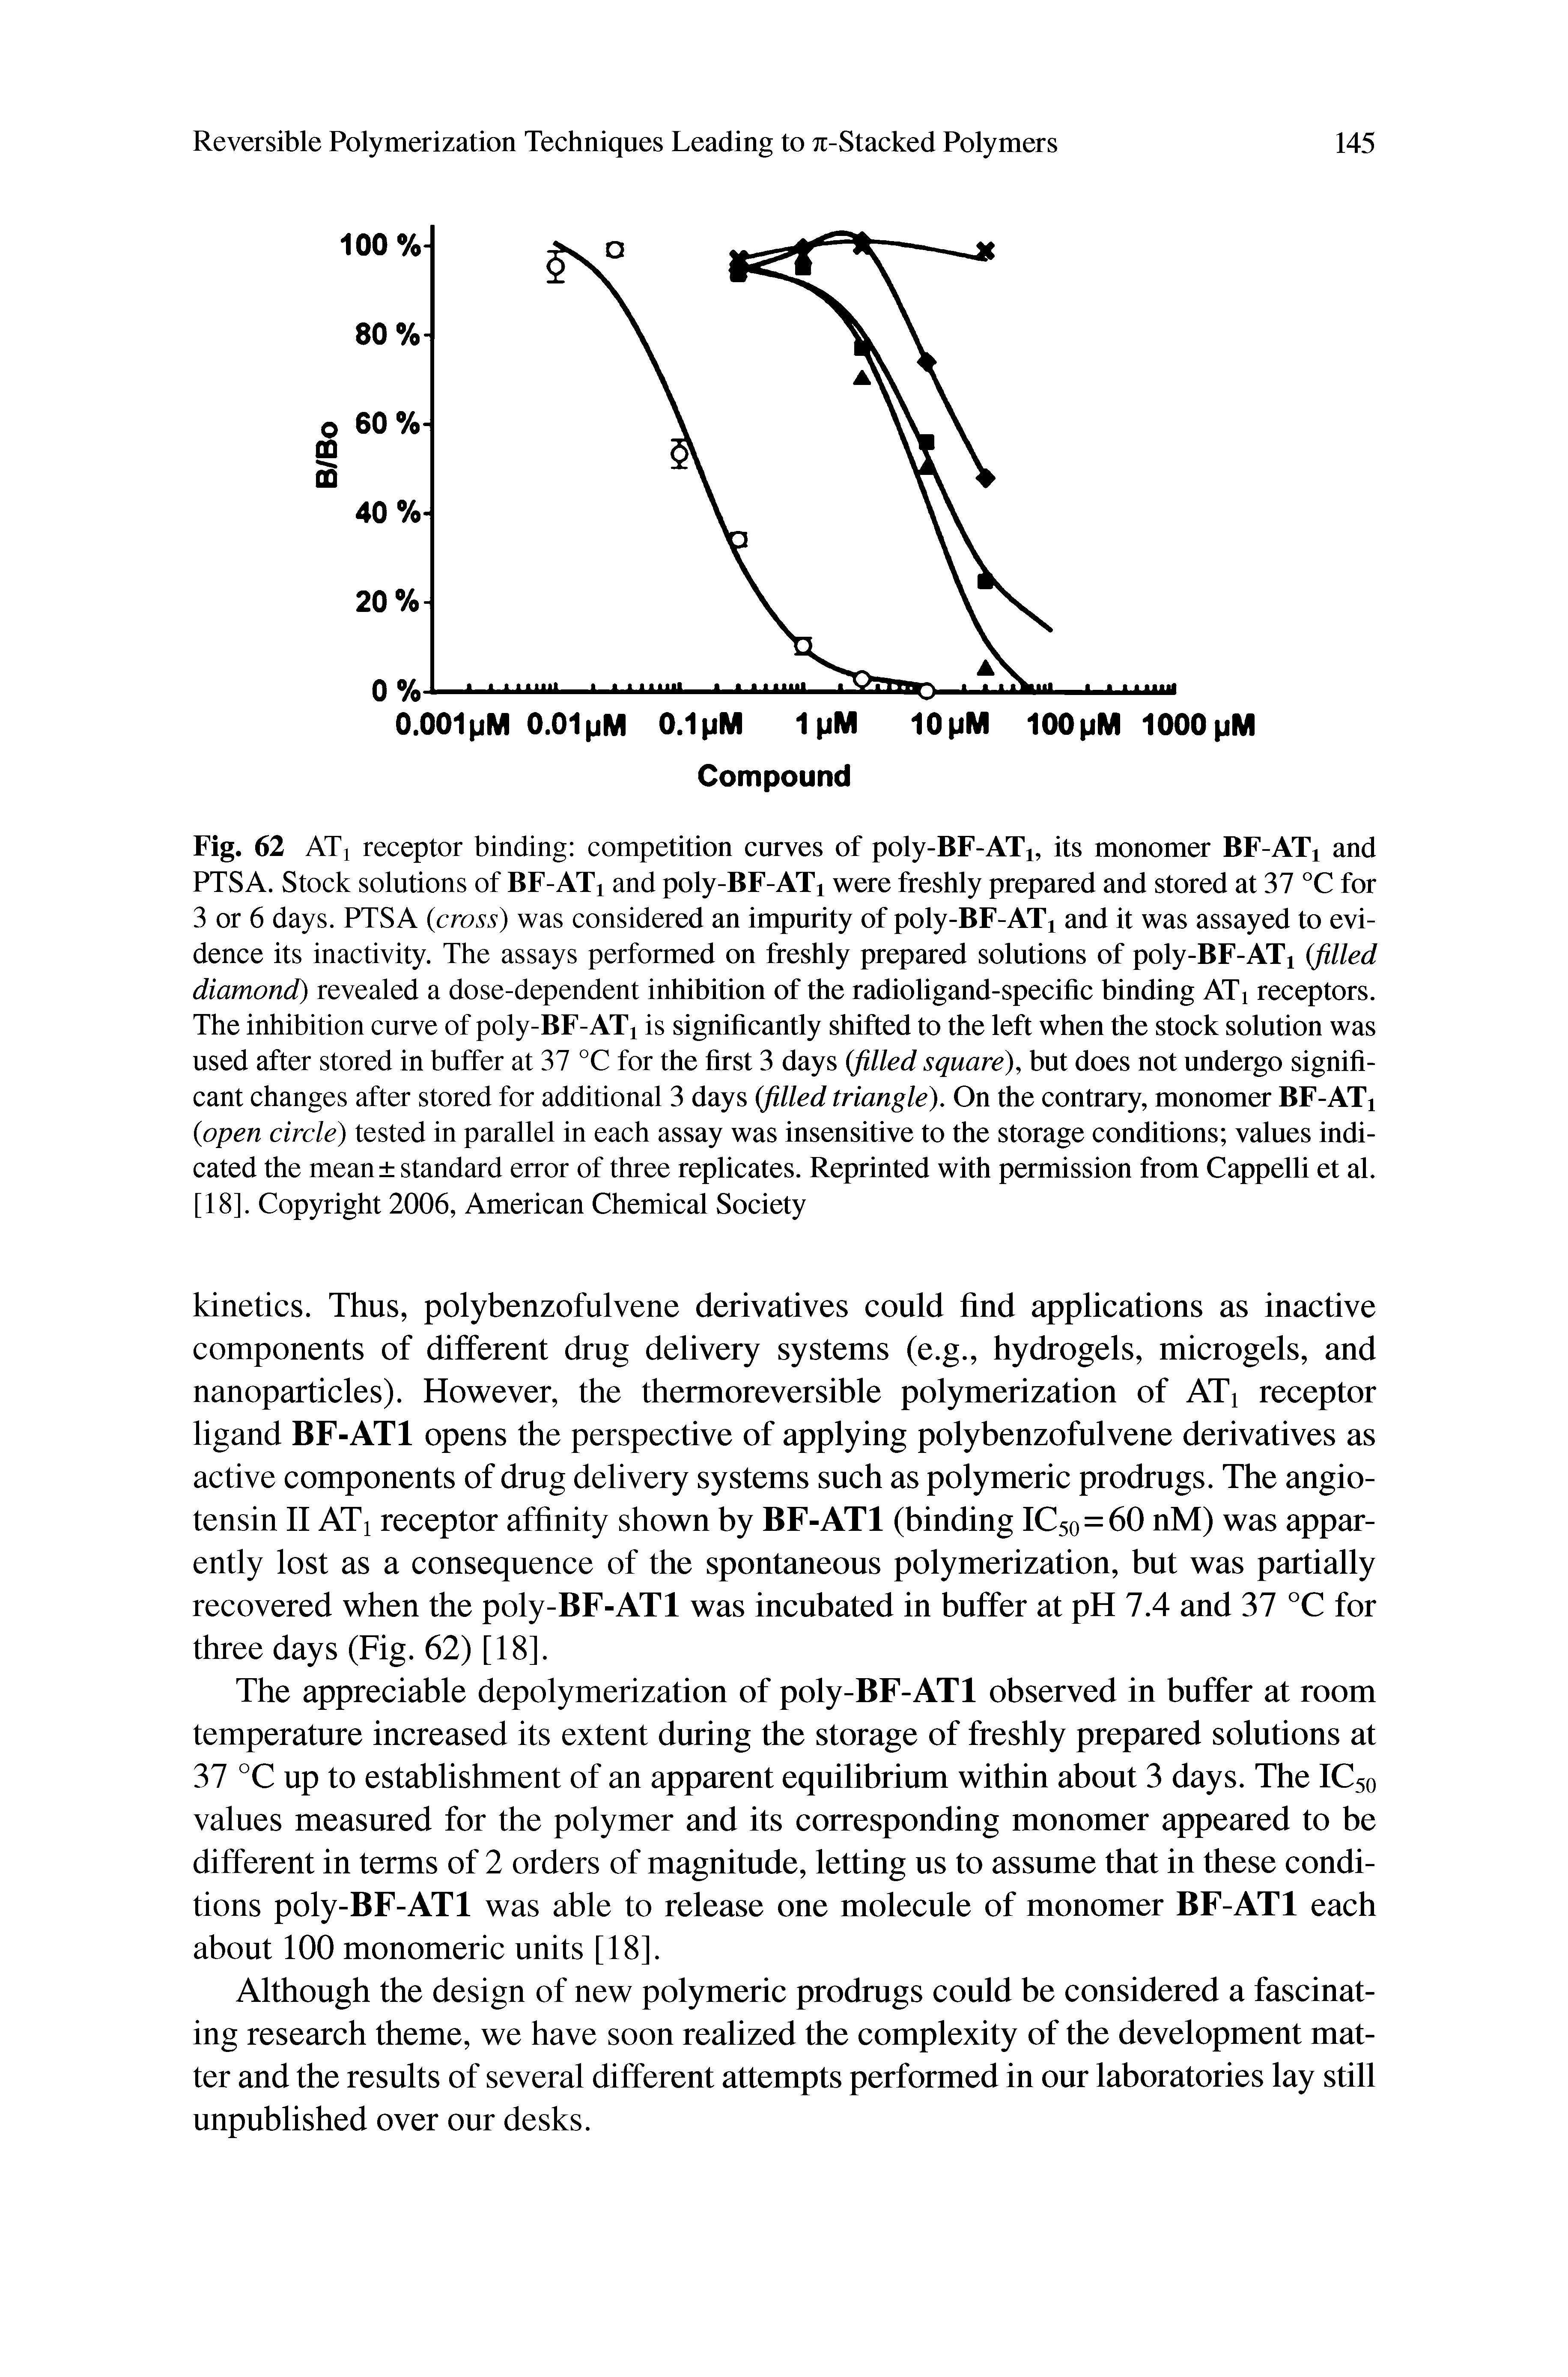 Fig. 62 ATi receptor binding competition curves of poly-BF-ATi, its monomer BF-ATi and PTSA. Stock solutions of BF-ATi and poly-BF-ATi were freshly prepared and stored at 37 °C for 3 or 6 days. PTSA (cross) was considered an impurity of poly-BF-ATi and it was assayed to evidence its inactivity. The assays performed on freshly prepared solutions of poly-BF-ATi (filled diamond) revealed a dose-dependent inhibition of the radioligand-specific binding ATi receptors. The inhibition curve of poly-BF-ATj is significantly shifted to the left when the stock solution was used after stored in buffer at 37 °C for the first 3 days (filled square), but does not undergo significant changes after stored for additional 3 days (filled triangle). On the contrary, monomer BF-ATi (open circle) tested in parallel in each assay was insensitive to the storage conditions values indicated the mean standard error of three replicates. Reprinted with permission from Cappelli et al. [18]. Copyright 2006, American Chemical Society...